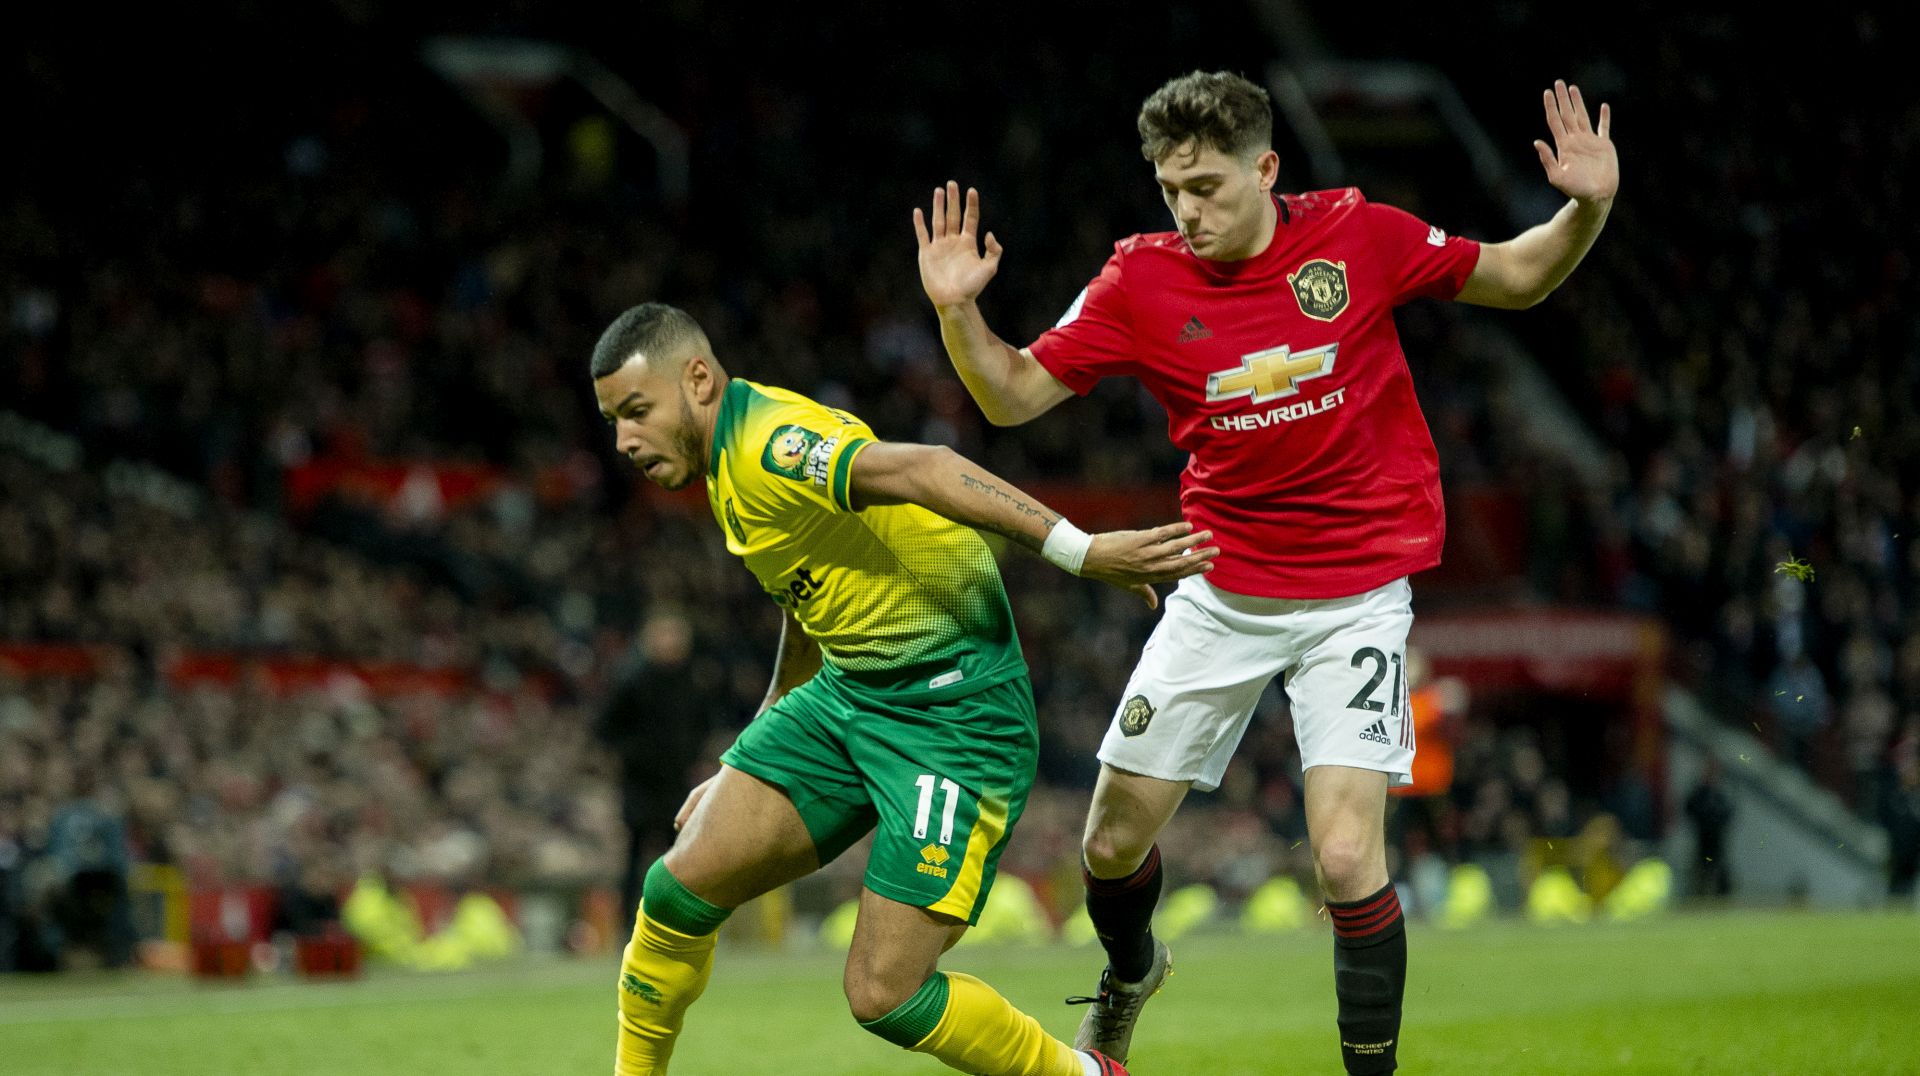 epa08120128 Norwich's Onel Hernandez (L) in action with Manchester United's Daniel James (R) during the English Premier League soccer match between Manchester United and Norwich City at Old Trafford, Manchester, Britain, 11 January 2020.  EPA/PETER POWELL EDITORIAL USE ONLY. No use with unauthorized audio, video, data, fixture lists, club/league logos or 'live' services. Online in-match use limited to 120 images, no video emulation. No use in betting, games or single club/league/player publications.